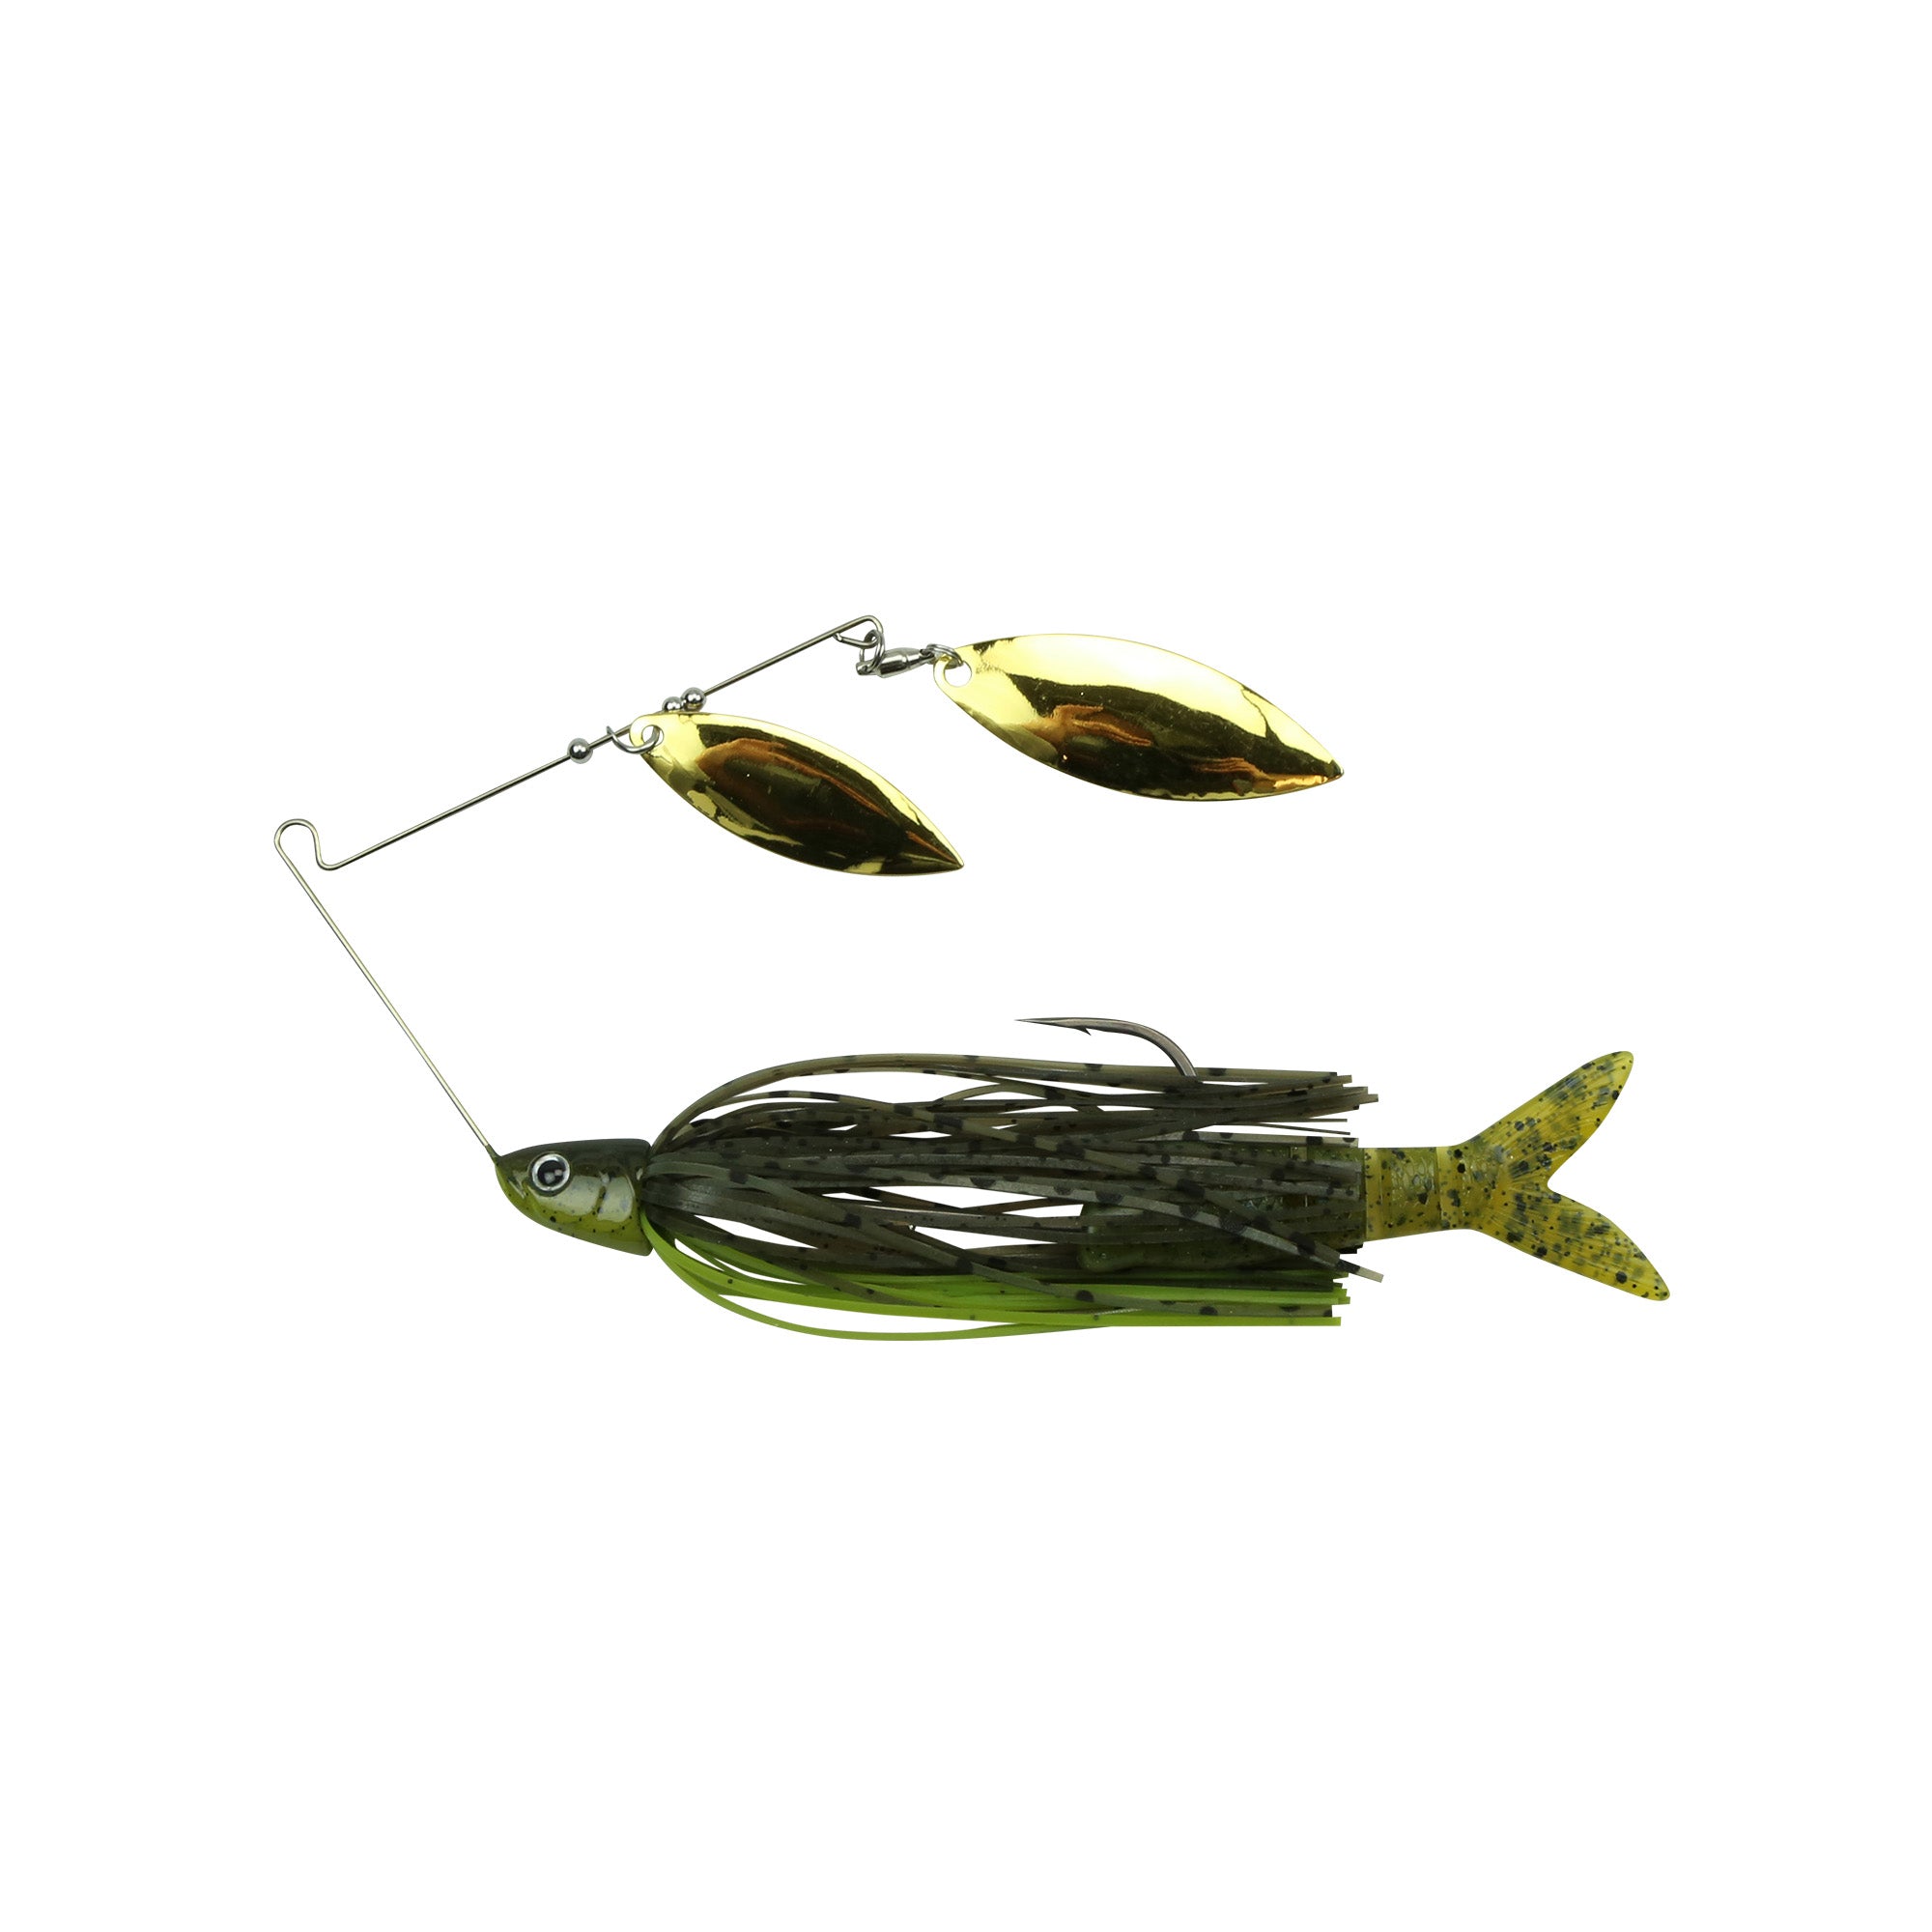 10,000 Fish Cyclebait Willow Blade